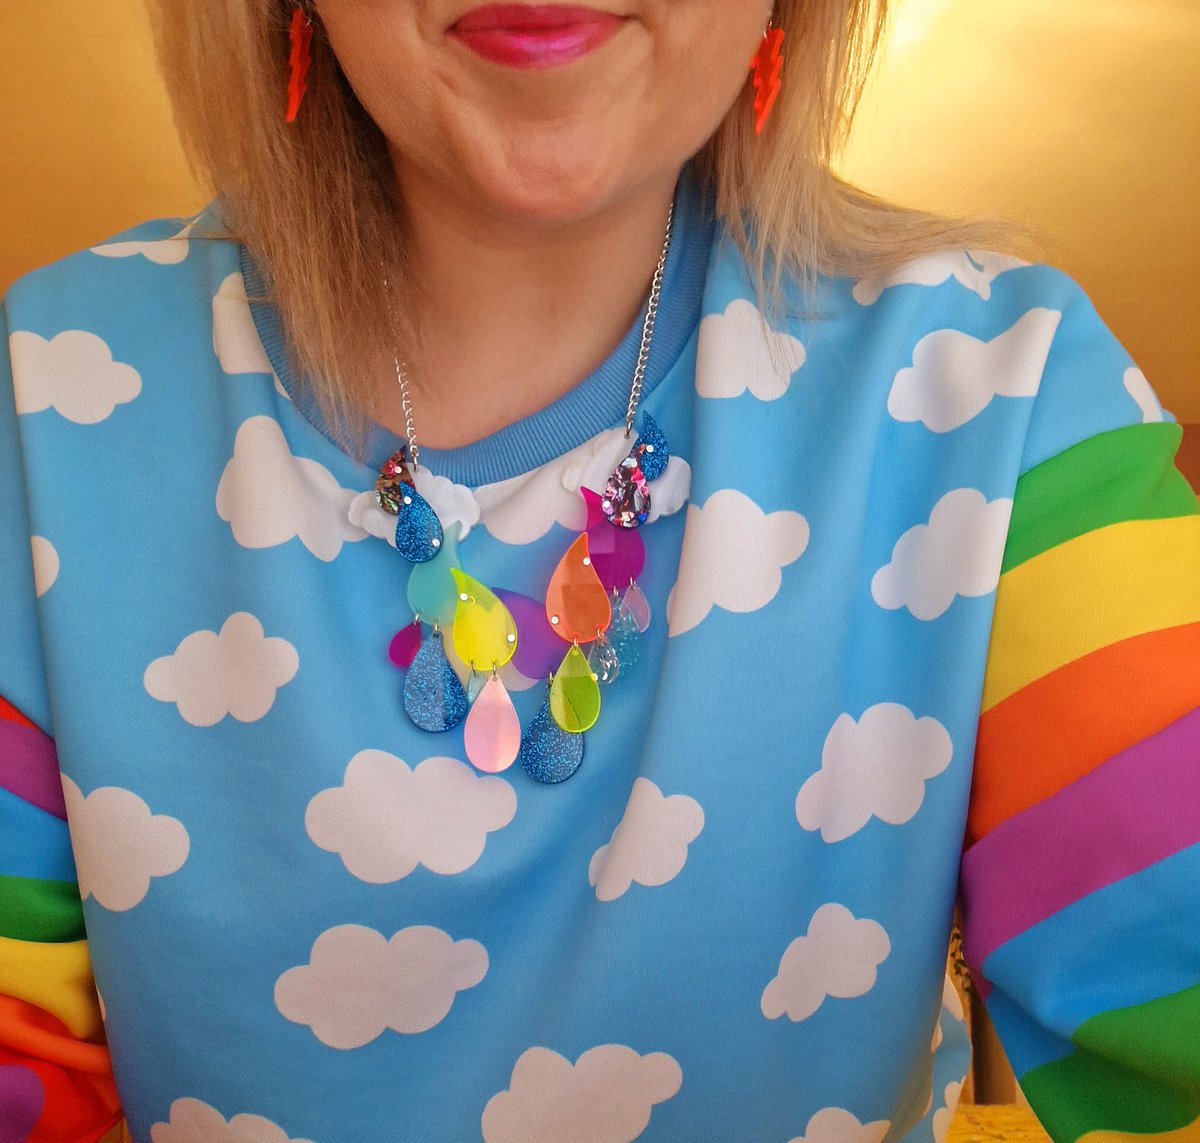 Today I've come as a weather map. ☀️🌧🌈⚡️🌦⛈️